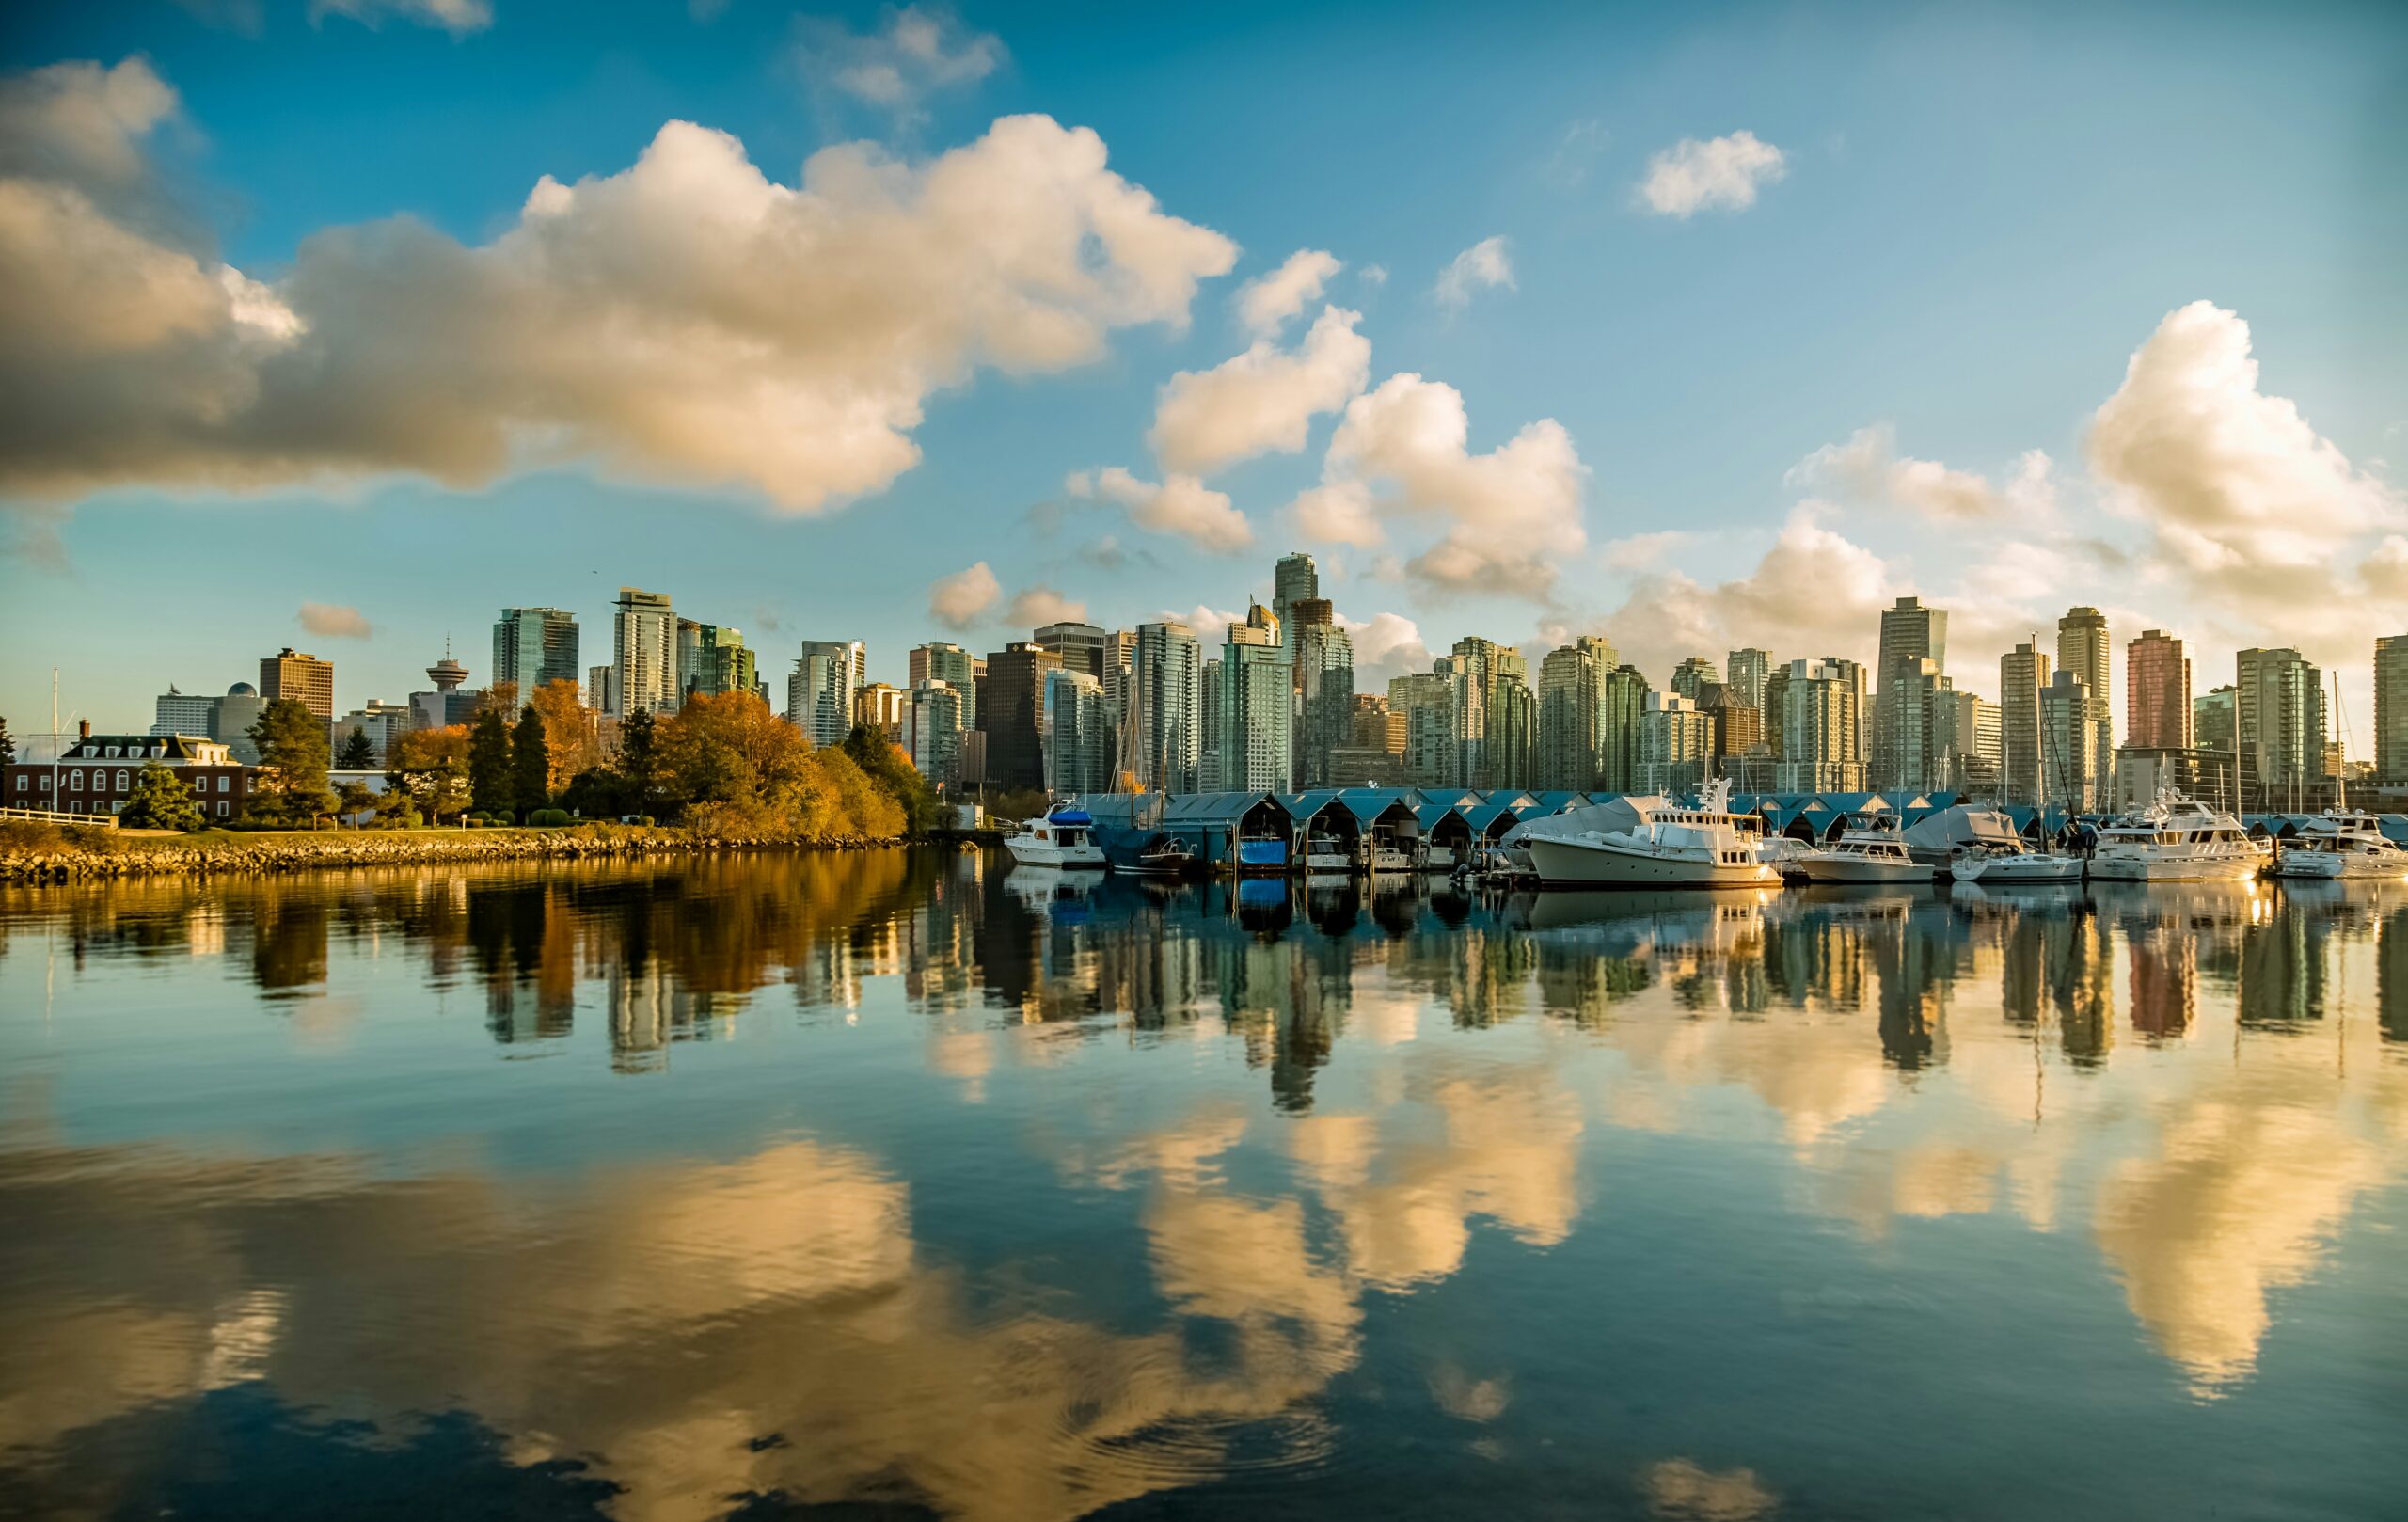 The Vancouver skyline is reflected in the water